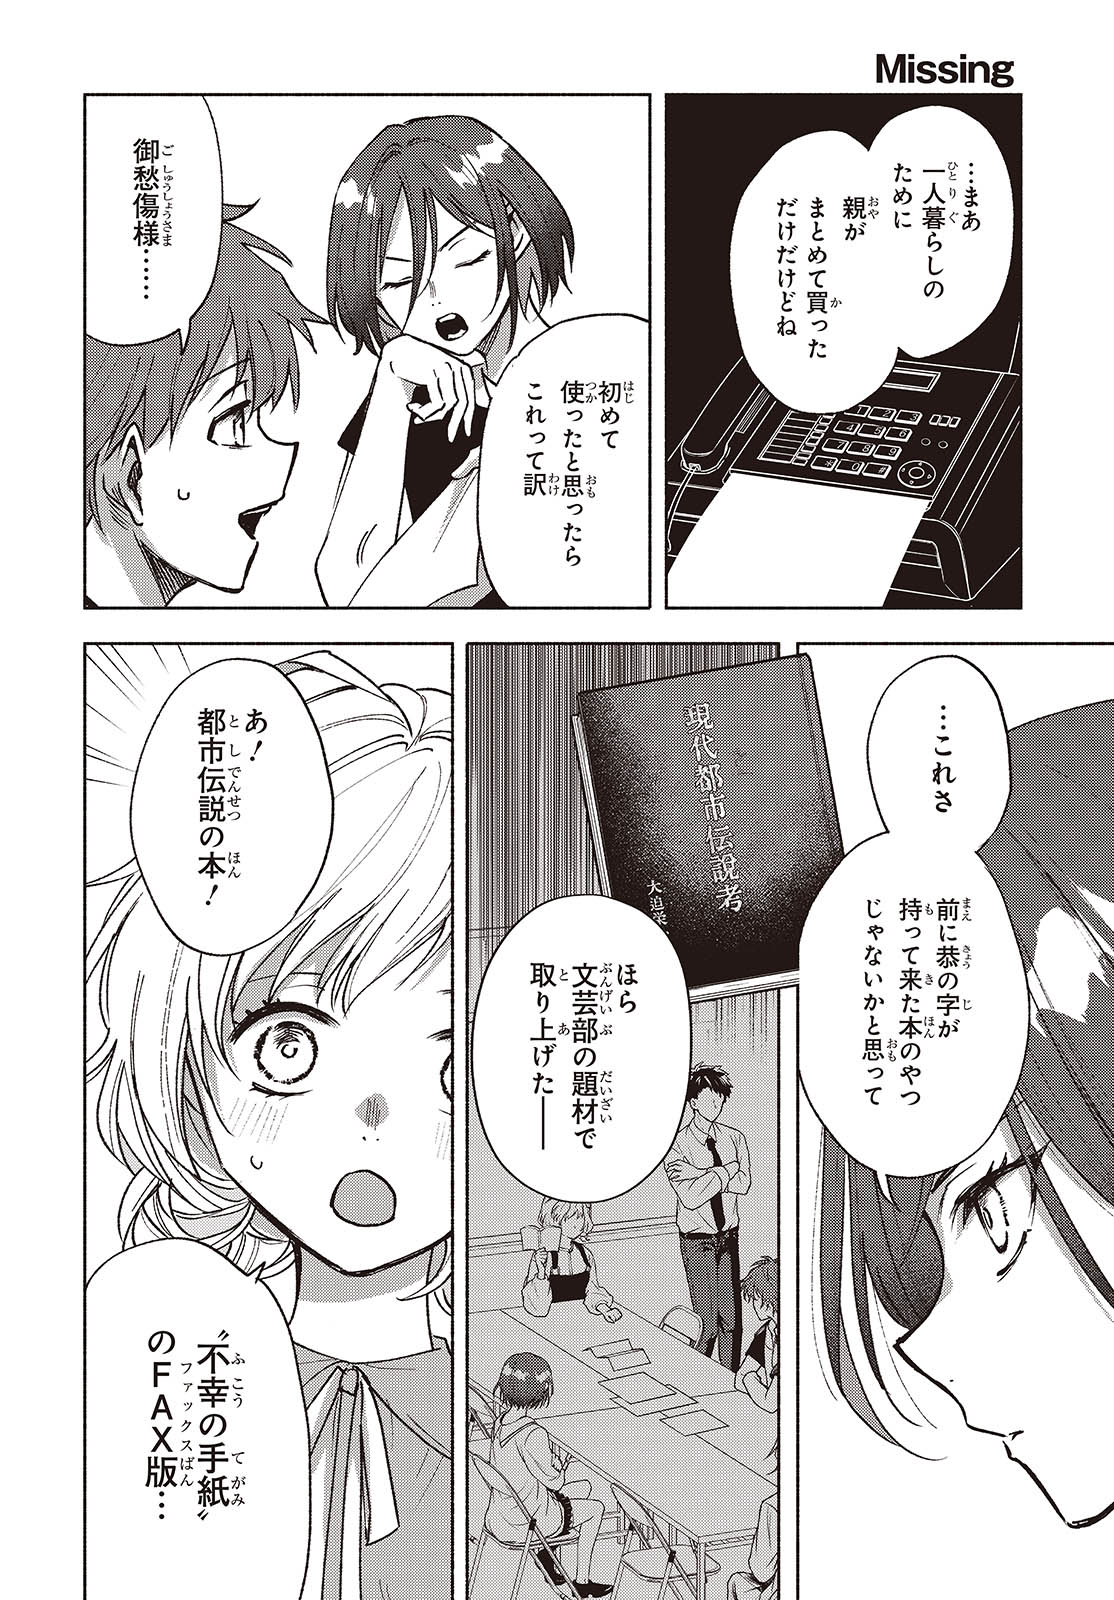 Missing 第12話 - Page 4